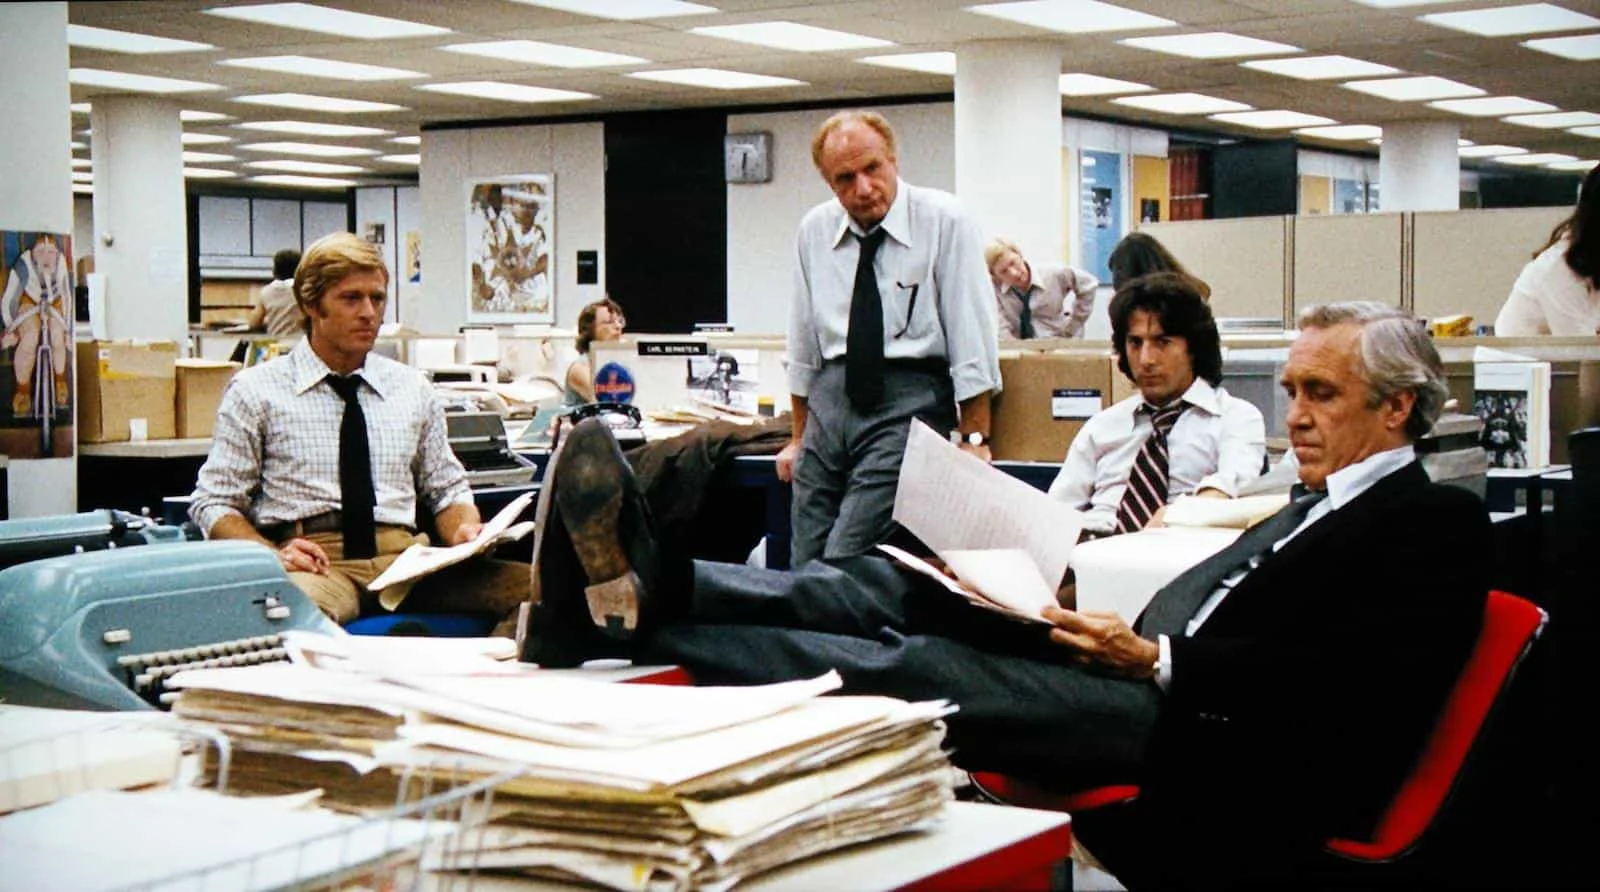 Deep Focus Shot - Best Camera Movement and Camera Angles - All The President's Men